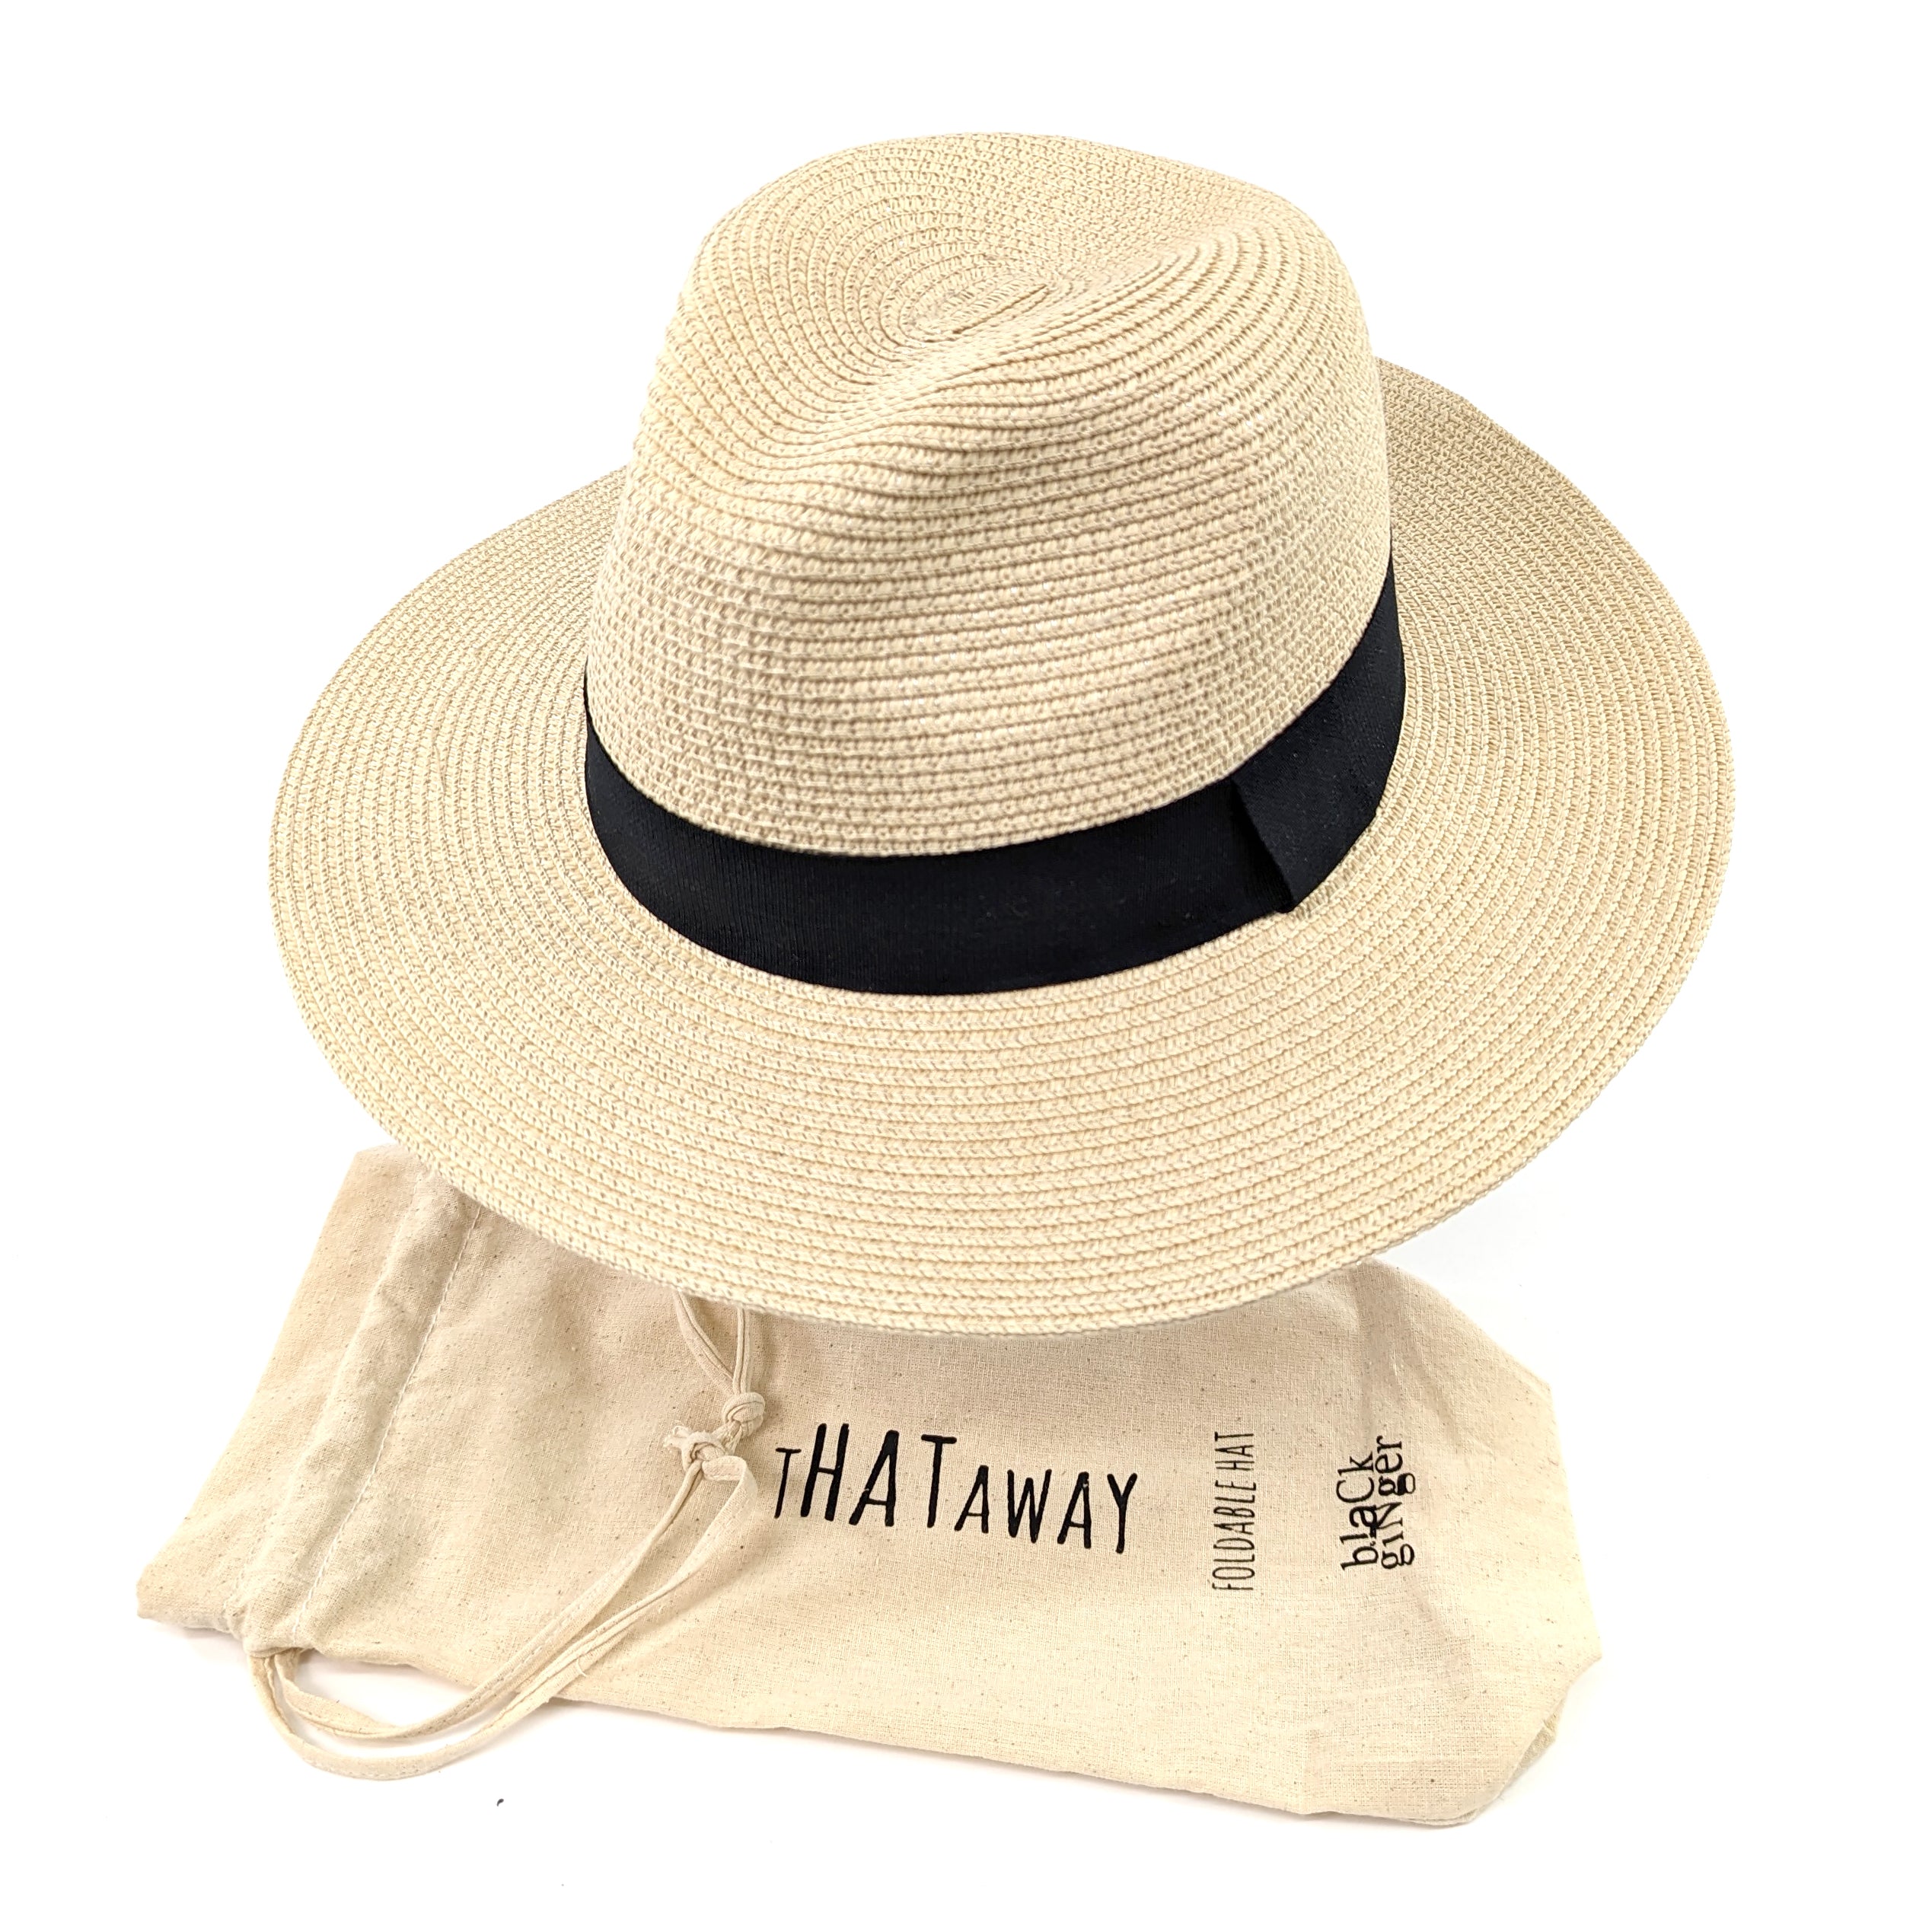 Foldable sun hat made of 100% paper straw sitting on a hat stand next to its travel bag. The hat has a 7cm brim for maximum sun protection, and the travel bag makes it easy to pack and take on the go